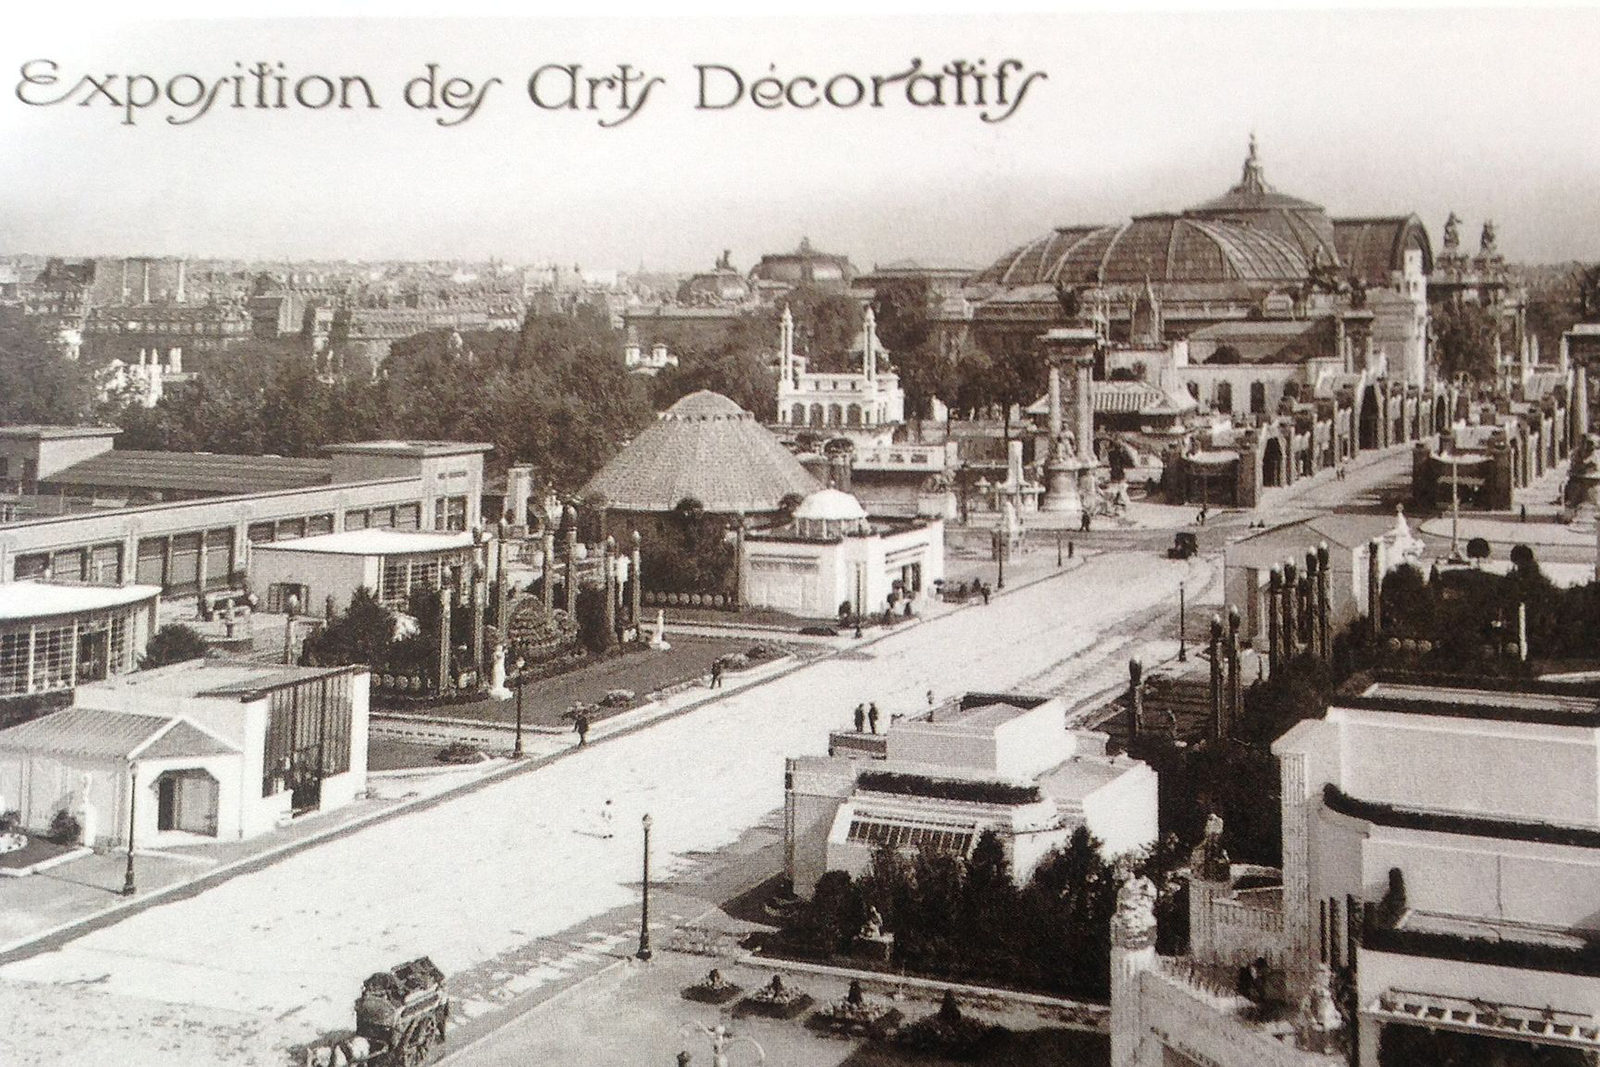 The 1925 Exposition Internationale des Arts Décoratifs in Paris is credited as being the birthplace of the Art Deco movement